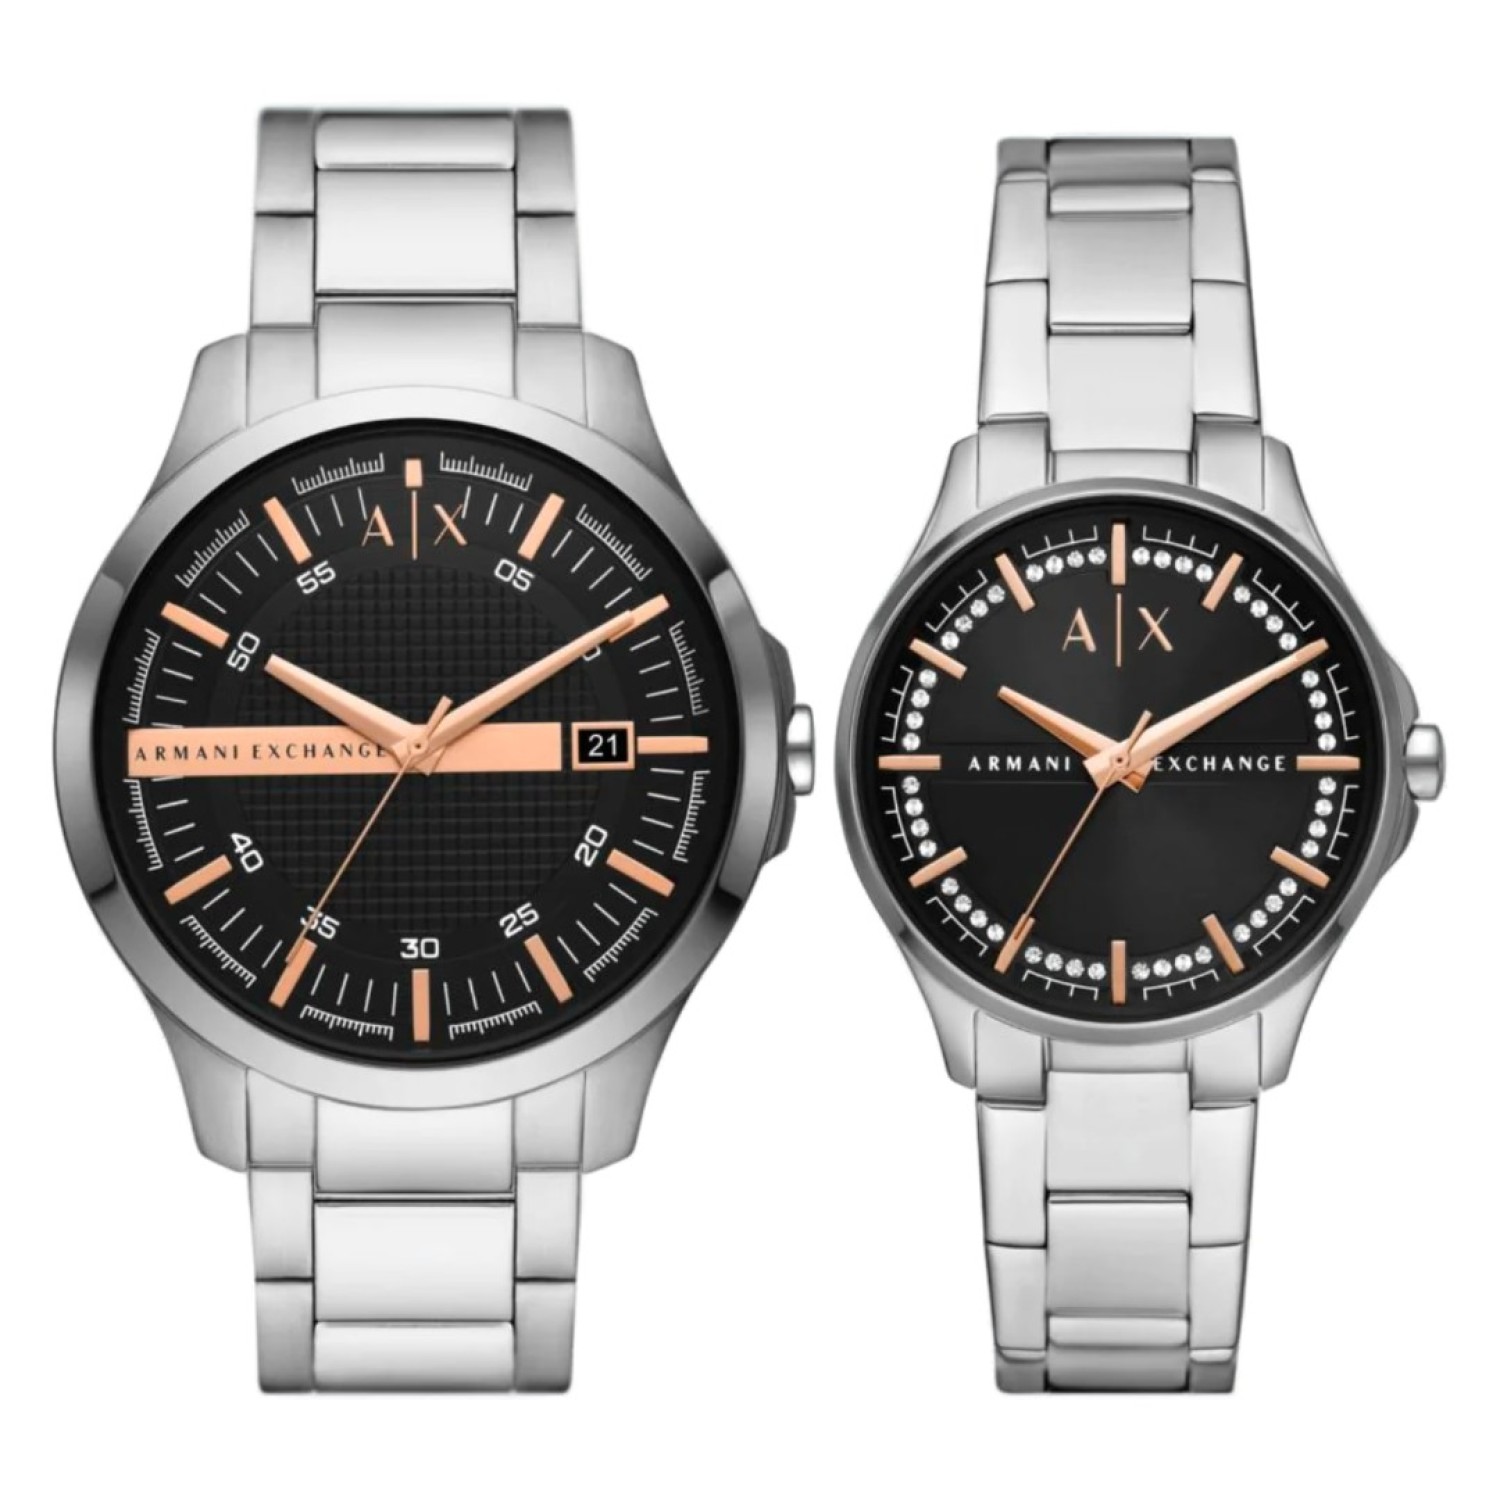 AX7132SET A|X Armani Exchange Couples Watch Set. AX7132SET A|X Armani Exchange Three-Hand Couples Watch SetAfterpay - Split your purchase into 4 instalments - Pay for your purchase over 4 instalments, due every two weeks.